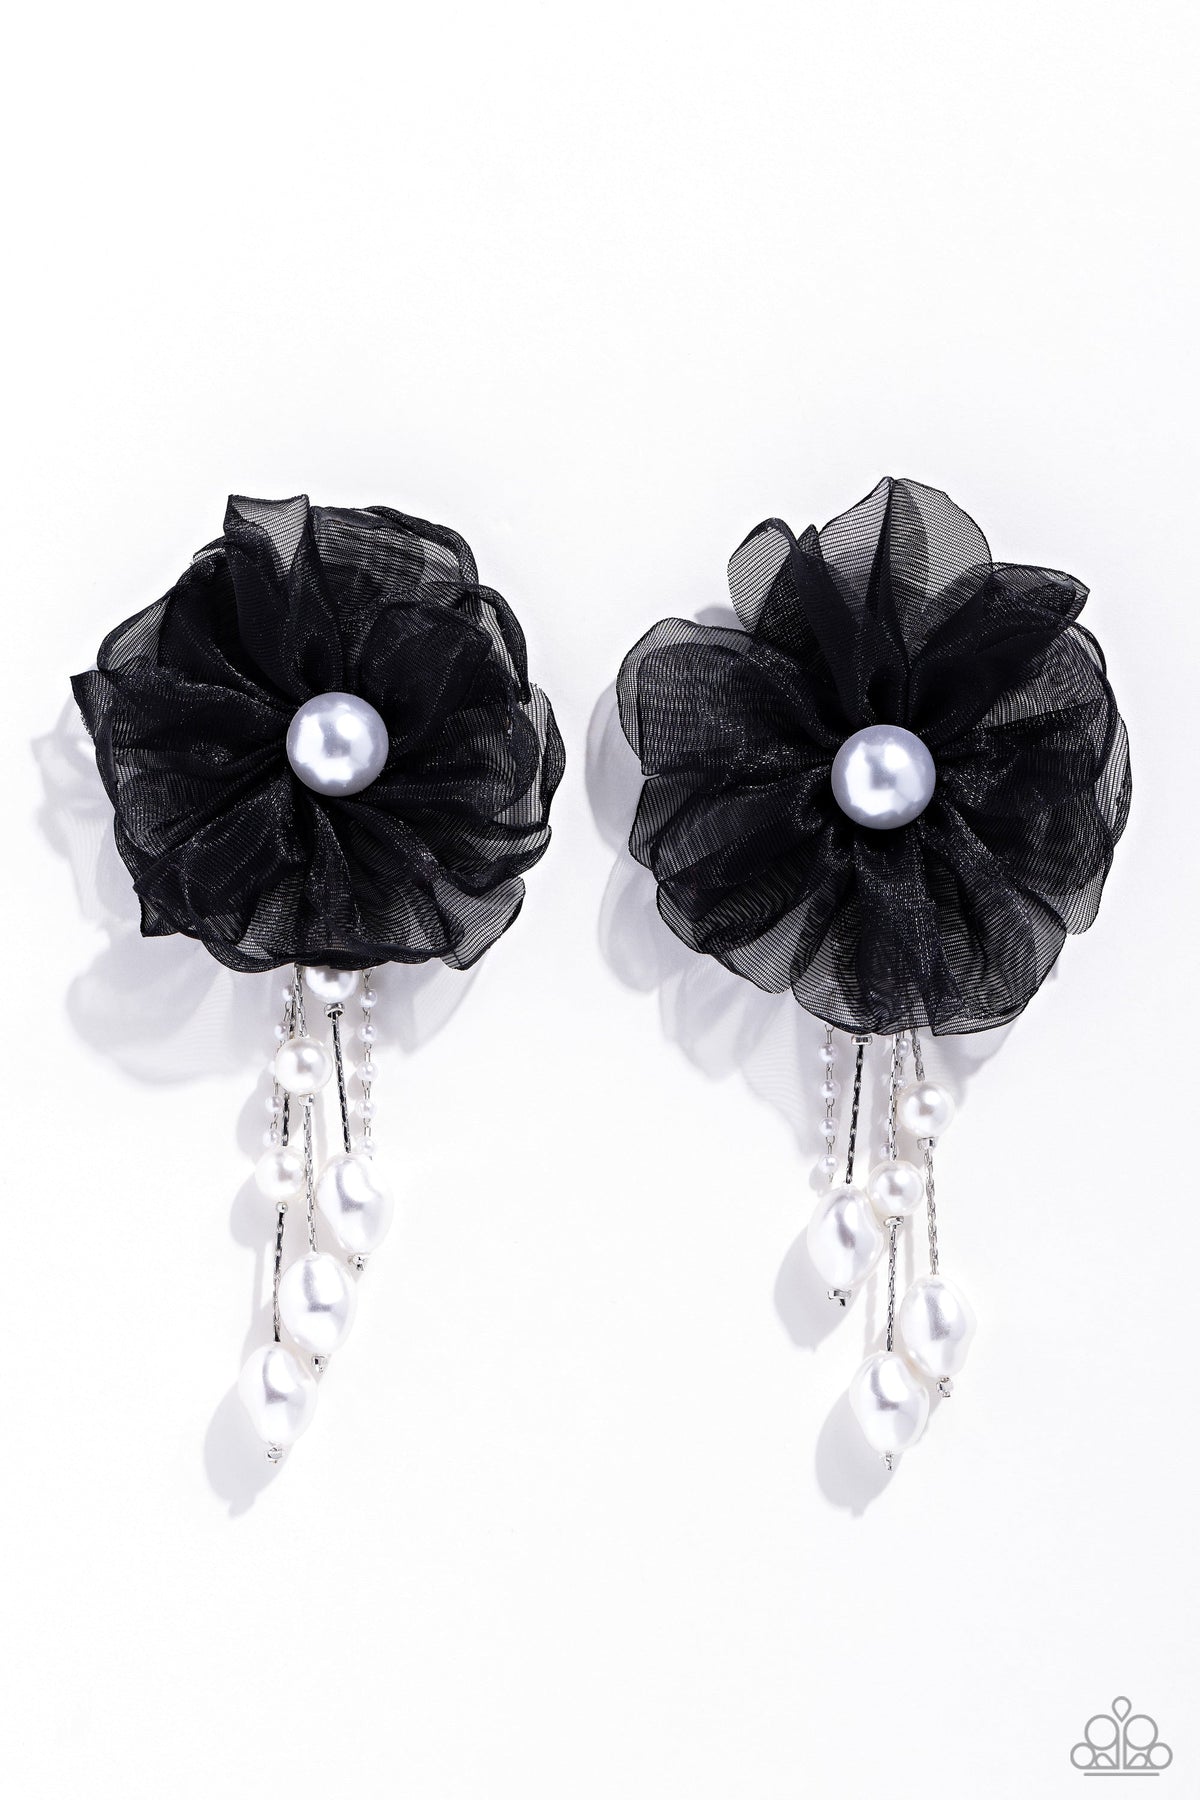 Dipping in Decadence Black Silk &amp; White Pearl Earrings - Paparazzi Accessories- lightbox - CarasShop.com - $5 Jewelry by Cara Jewels